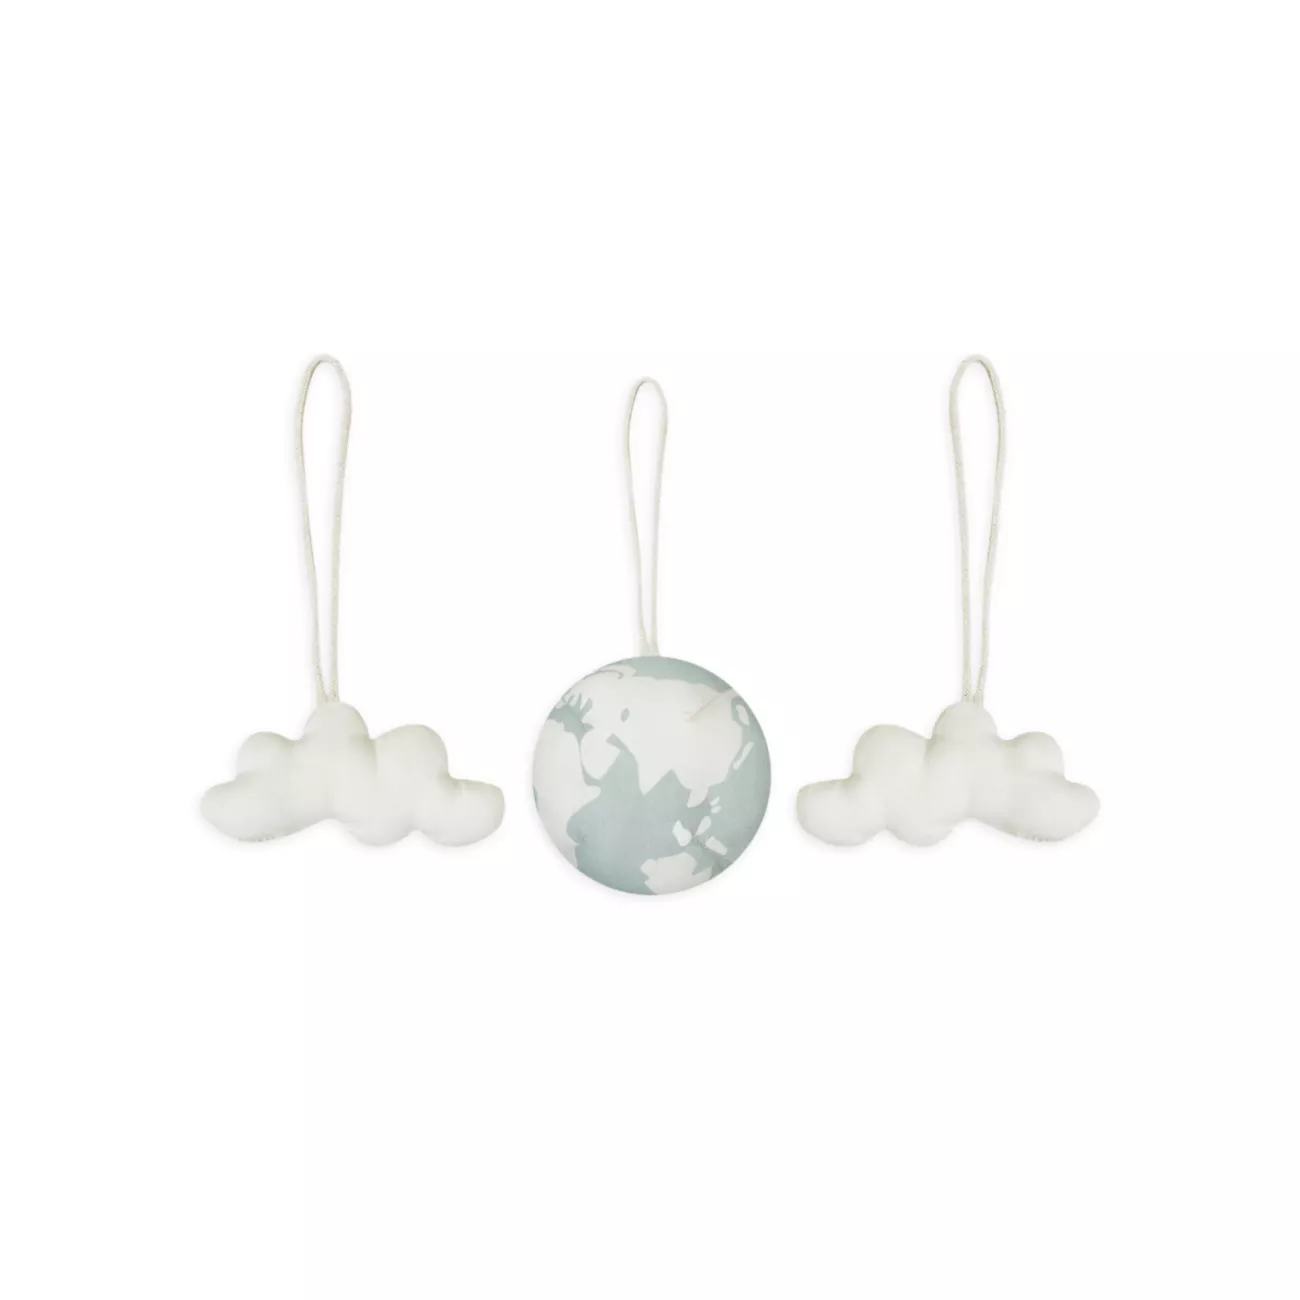 Babies Set Of 3 Gym Rattle Toy Hangers Lorena Canals